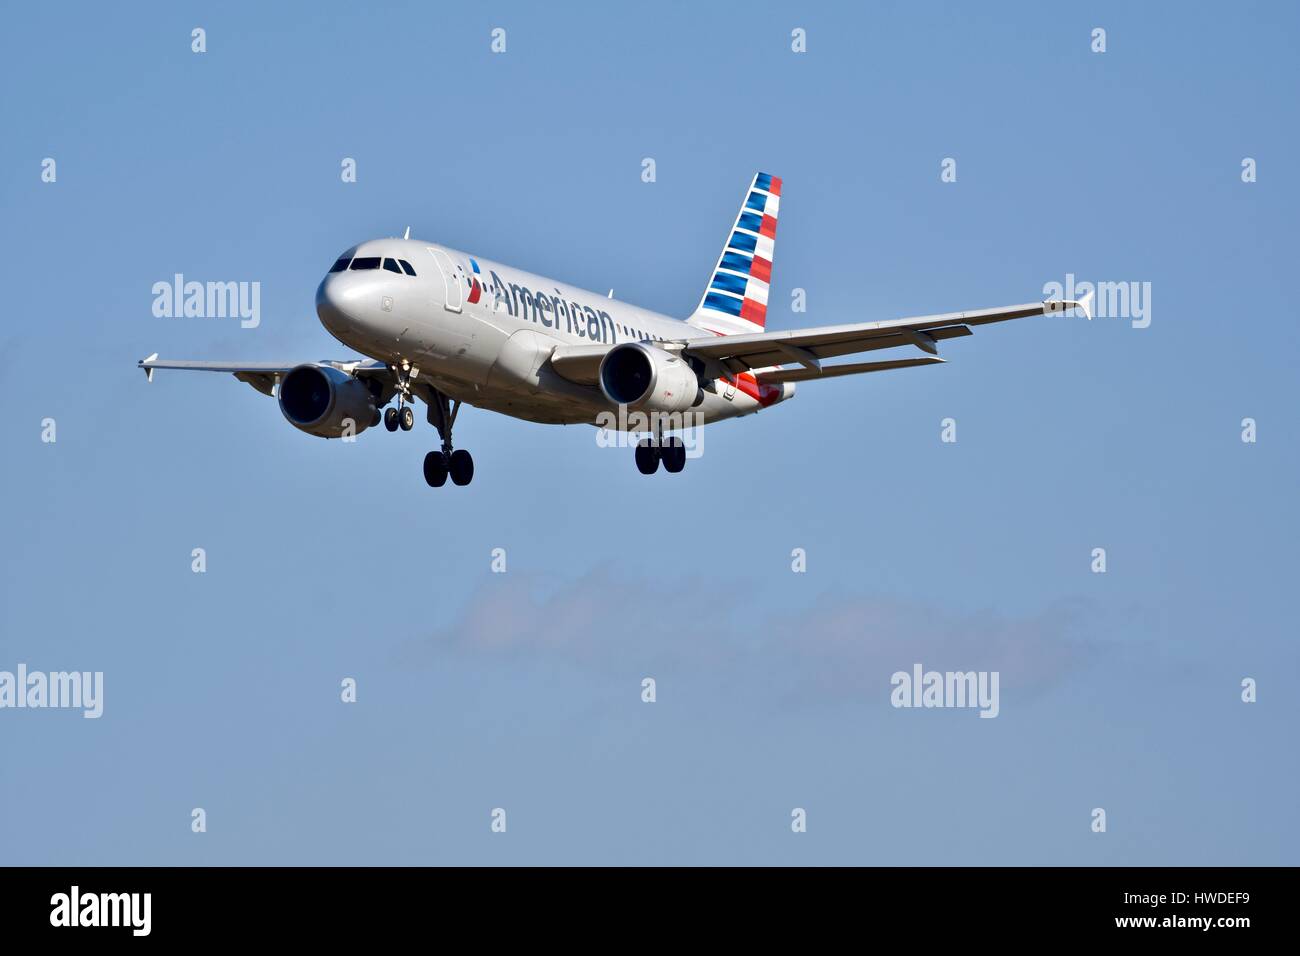 Bwi Airport Stock Photos Bwi Airport Stock Images Alamy